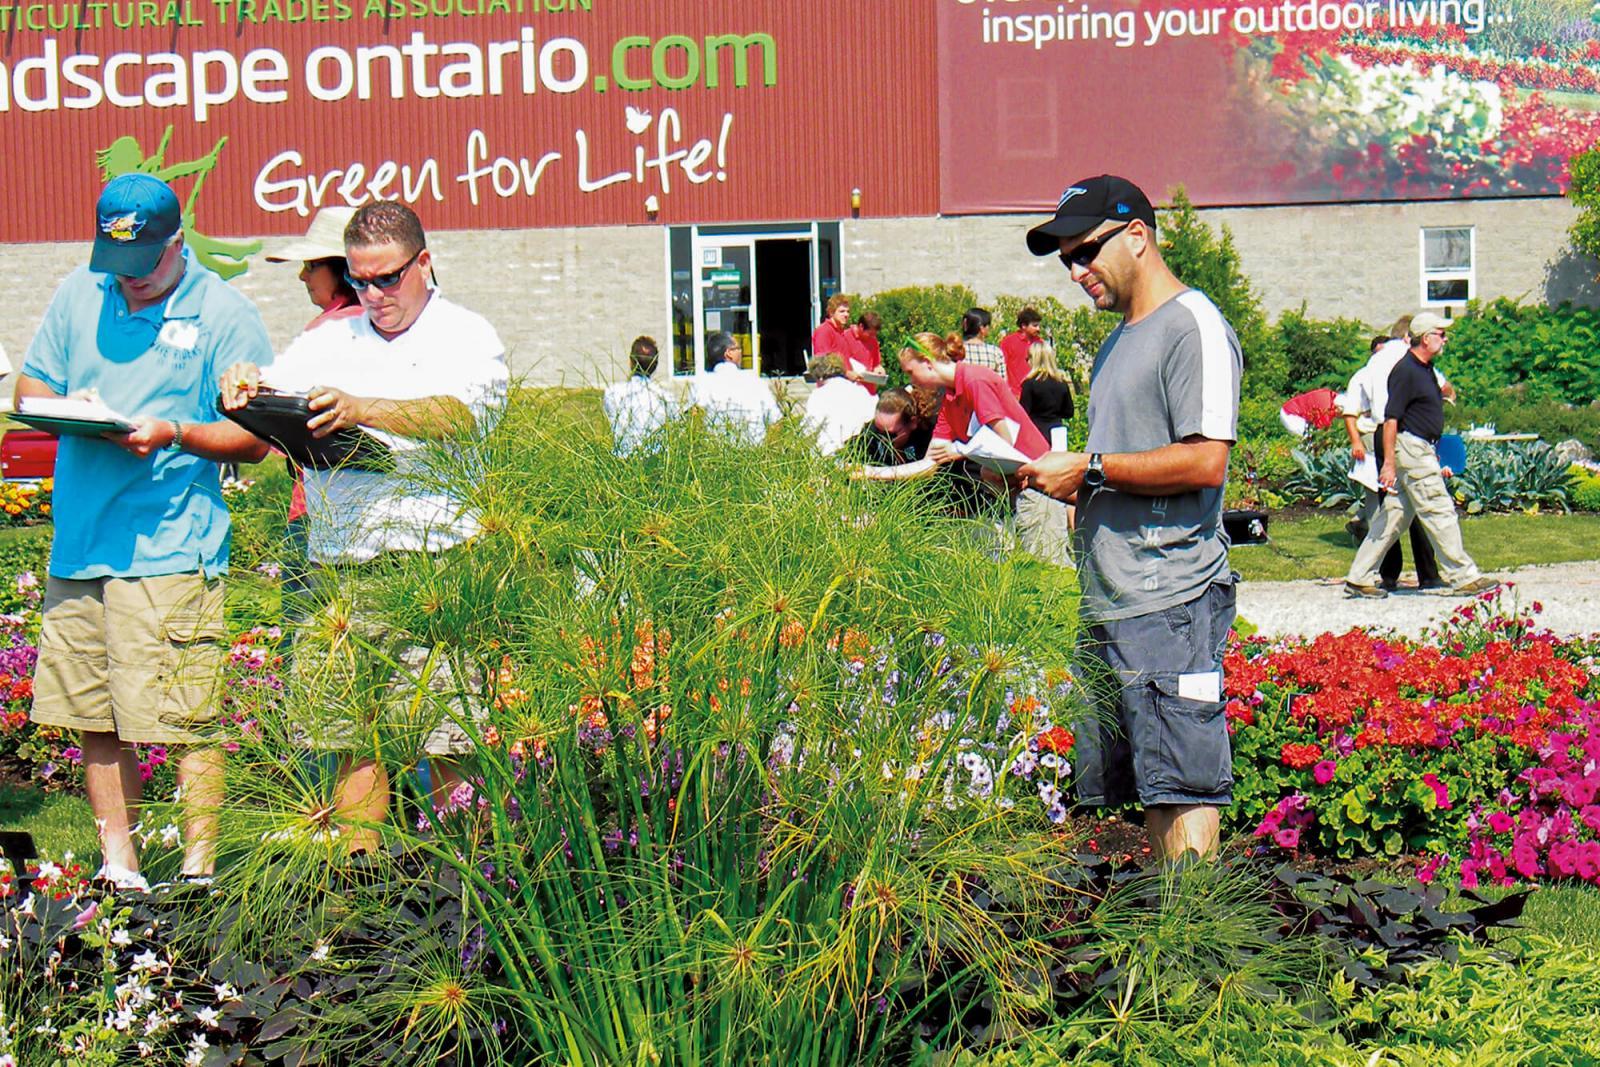 The annual trial gardens open house drew both industry and consumers to view what will be on the shelves next year.